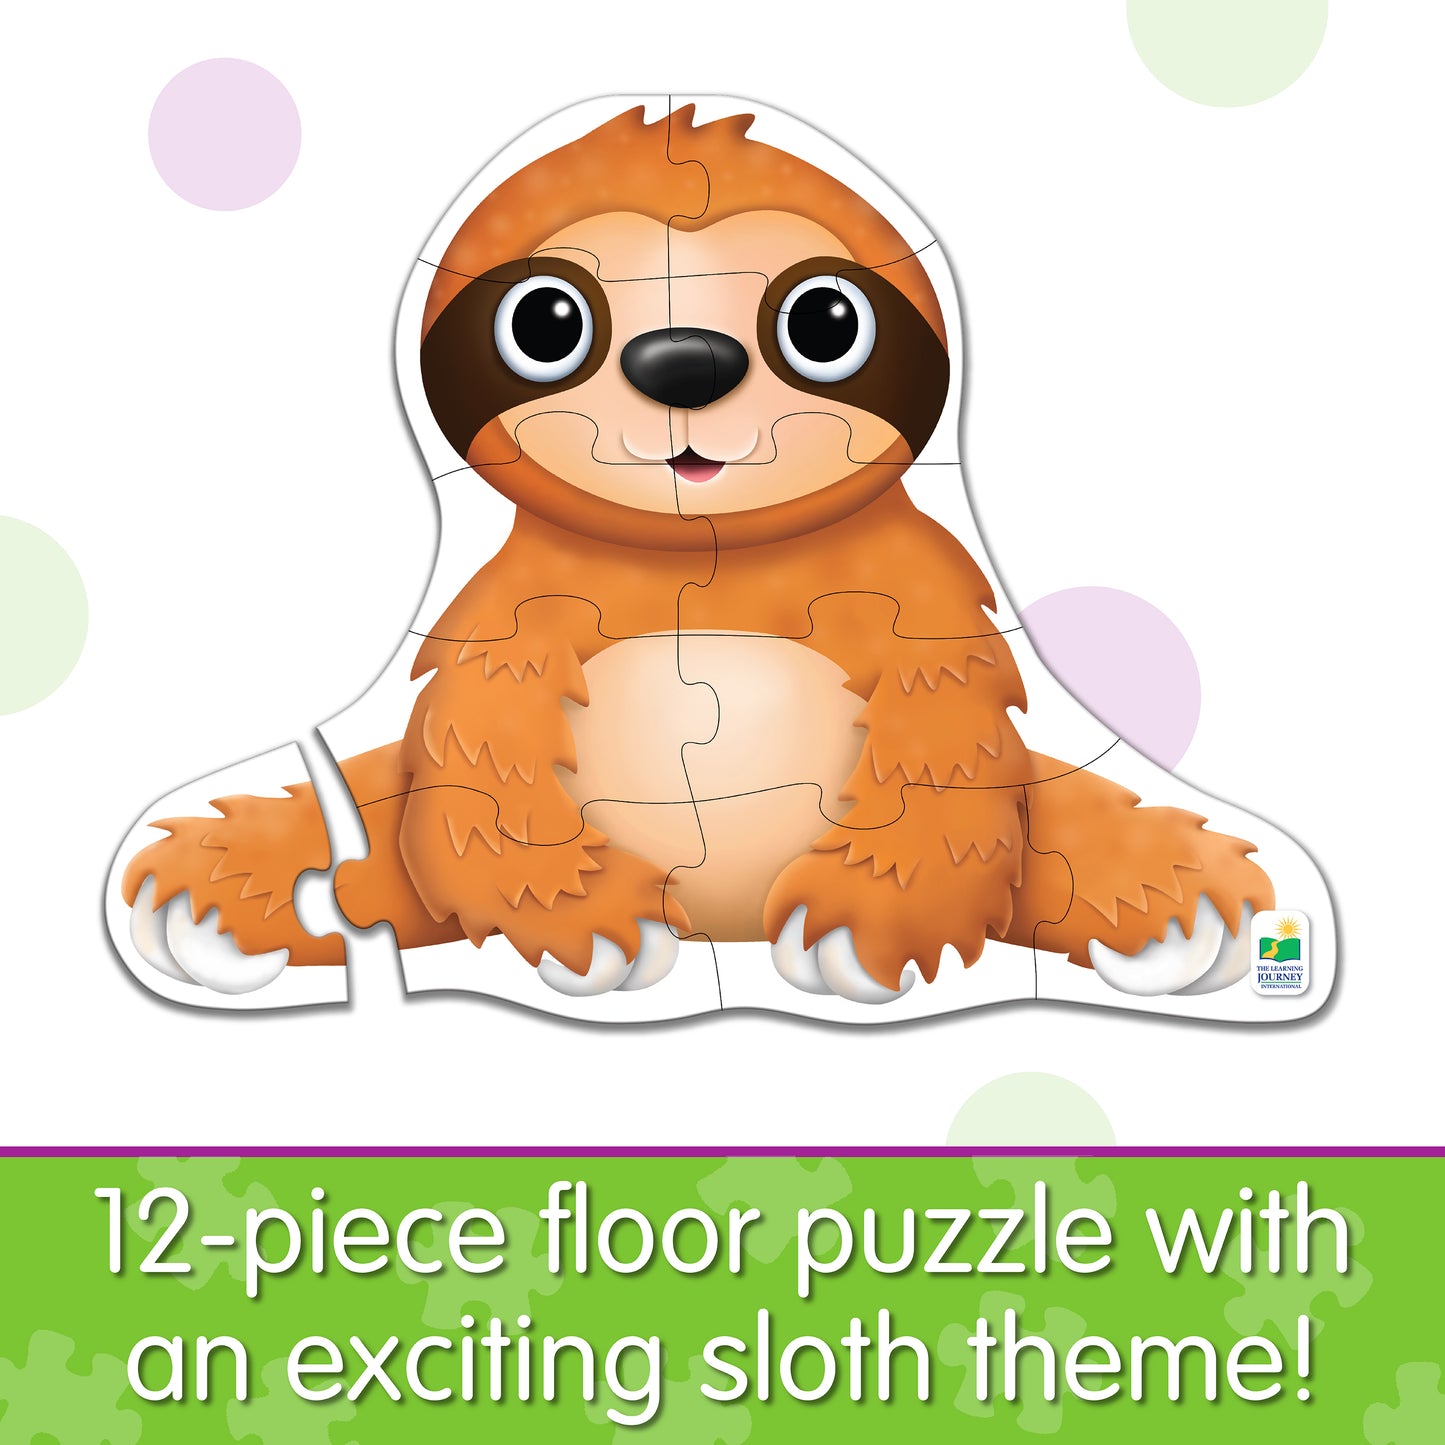 Infographic about My First Big Puzzle - Sleepy Sloth that says, "12-piece floor puzzle with an exciting sloth theme!"